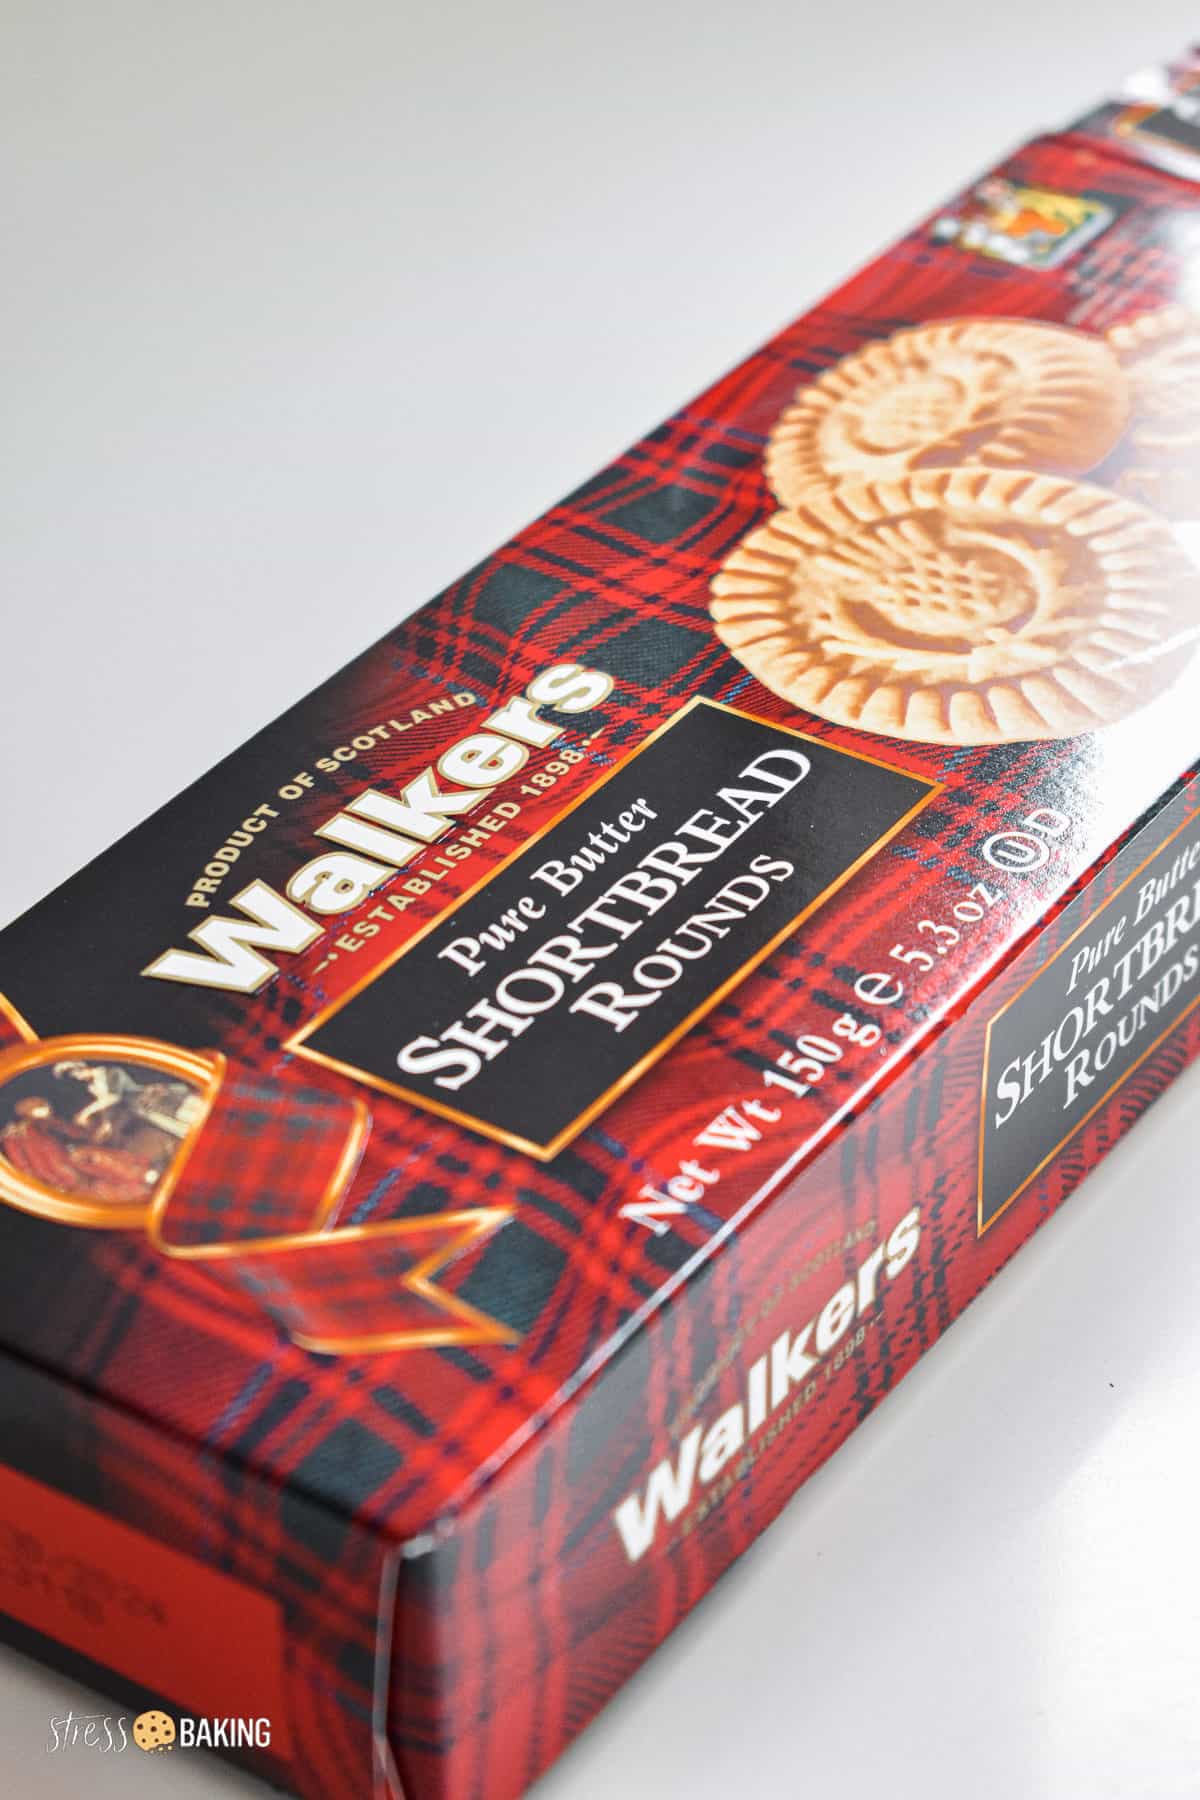 A red and black plaid box of Walkers Pure Butter Shortbread Rounds cookies